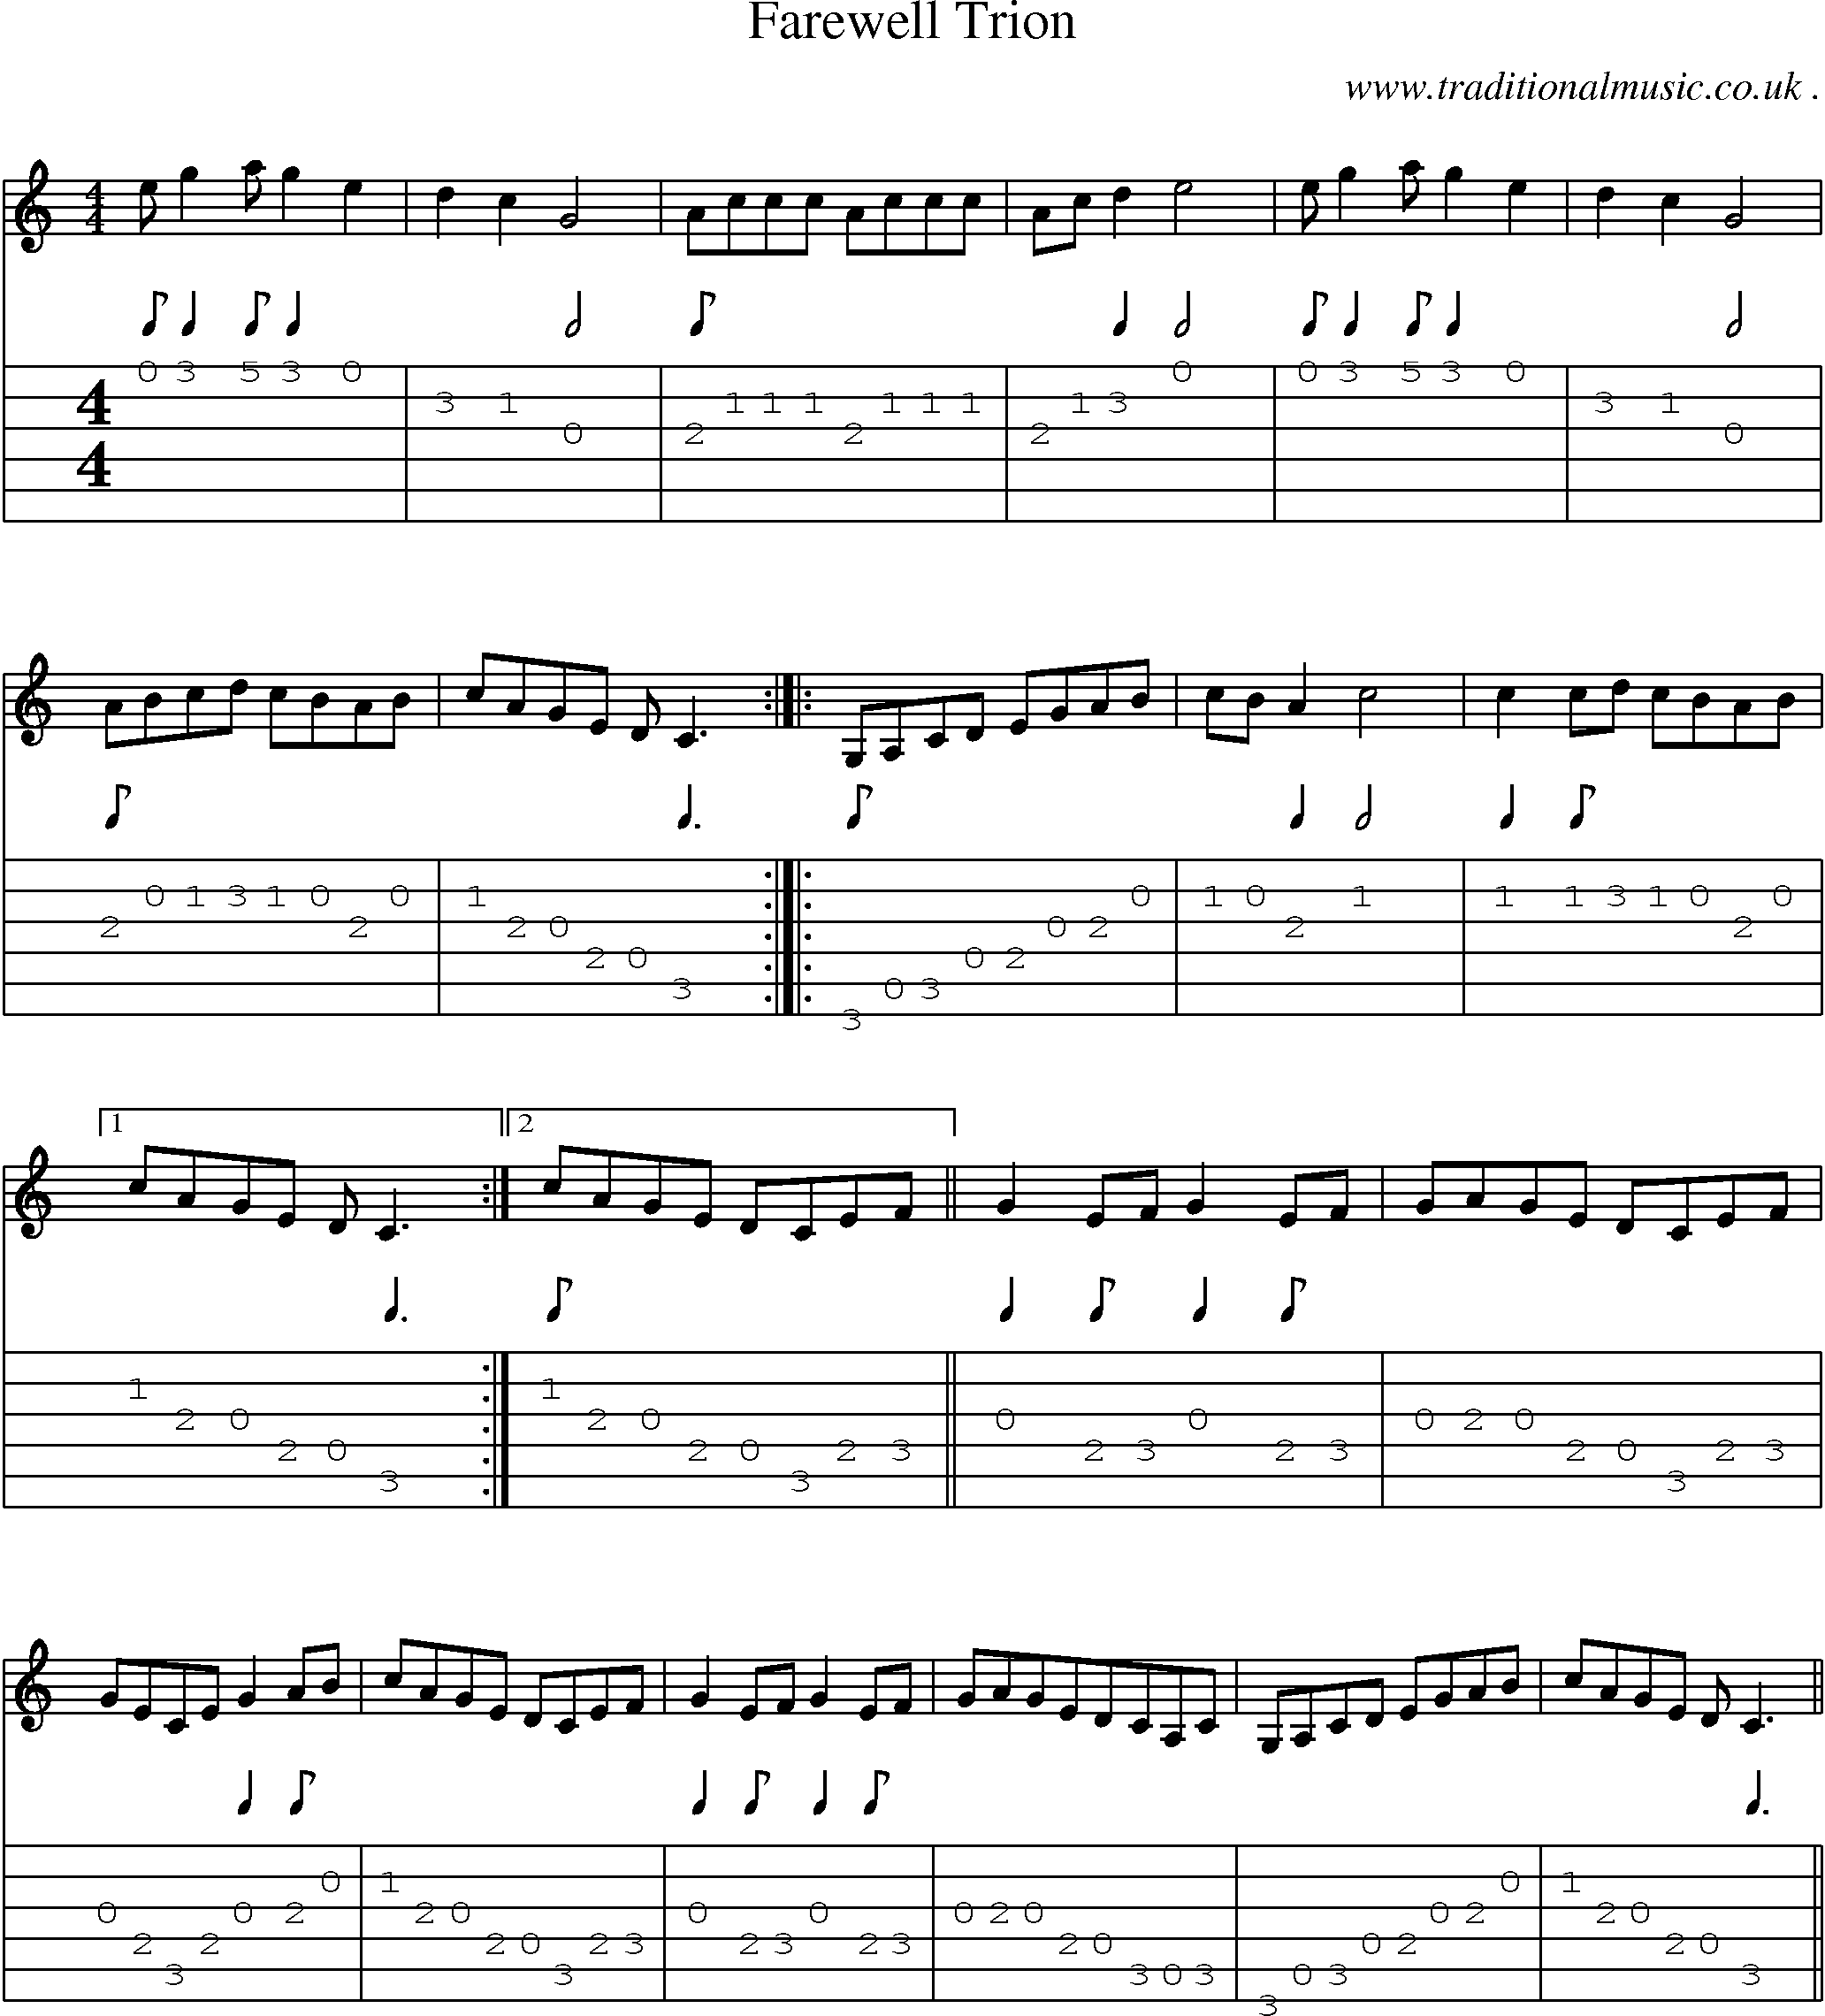 Music Score and Guitar Tabs for Farewell Trion